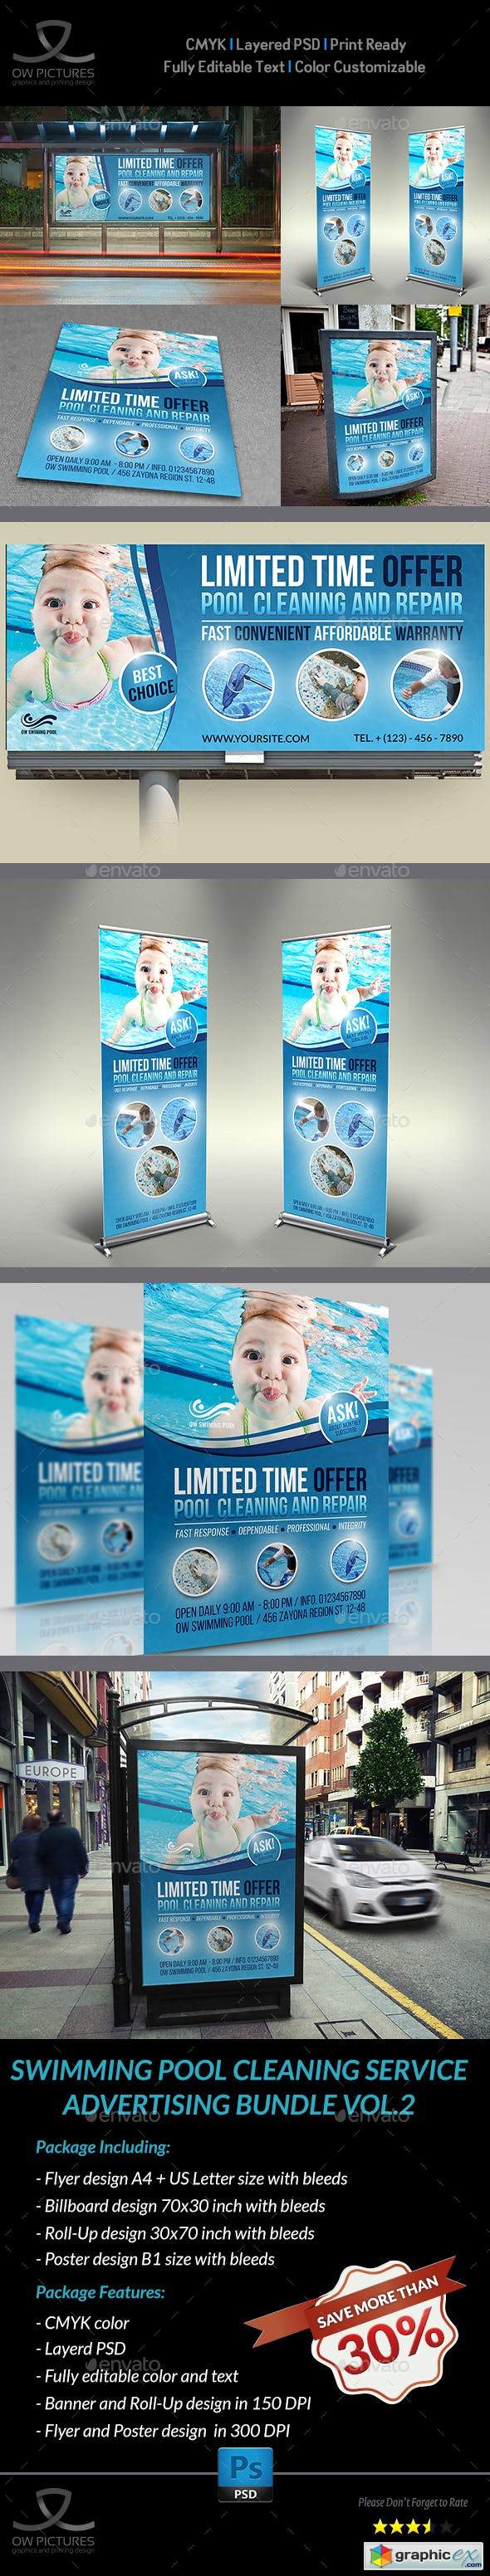 Swimming Pool Cleaning Service Advertising Bundle Vol 2